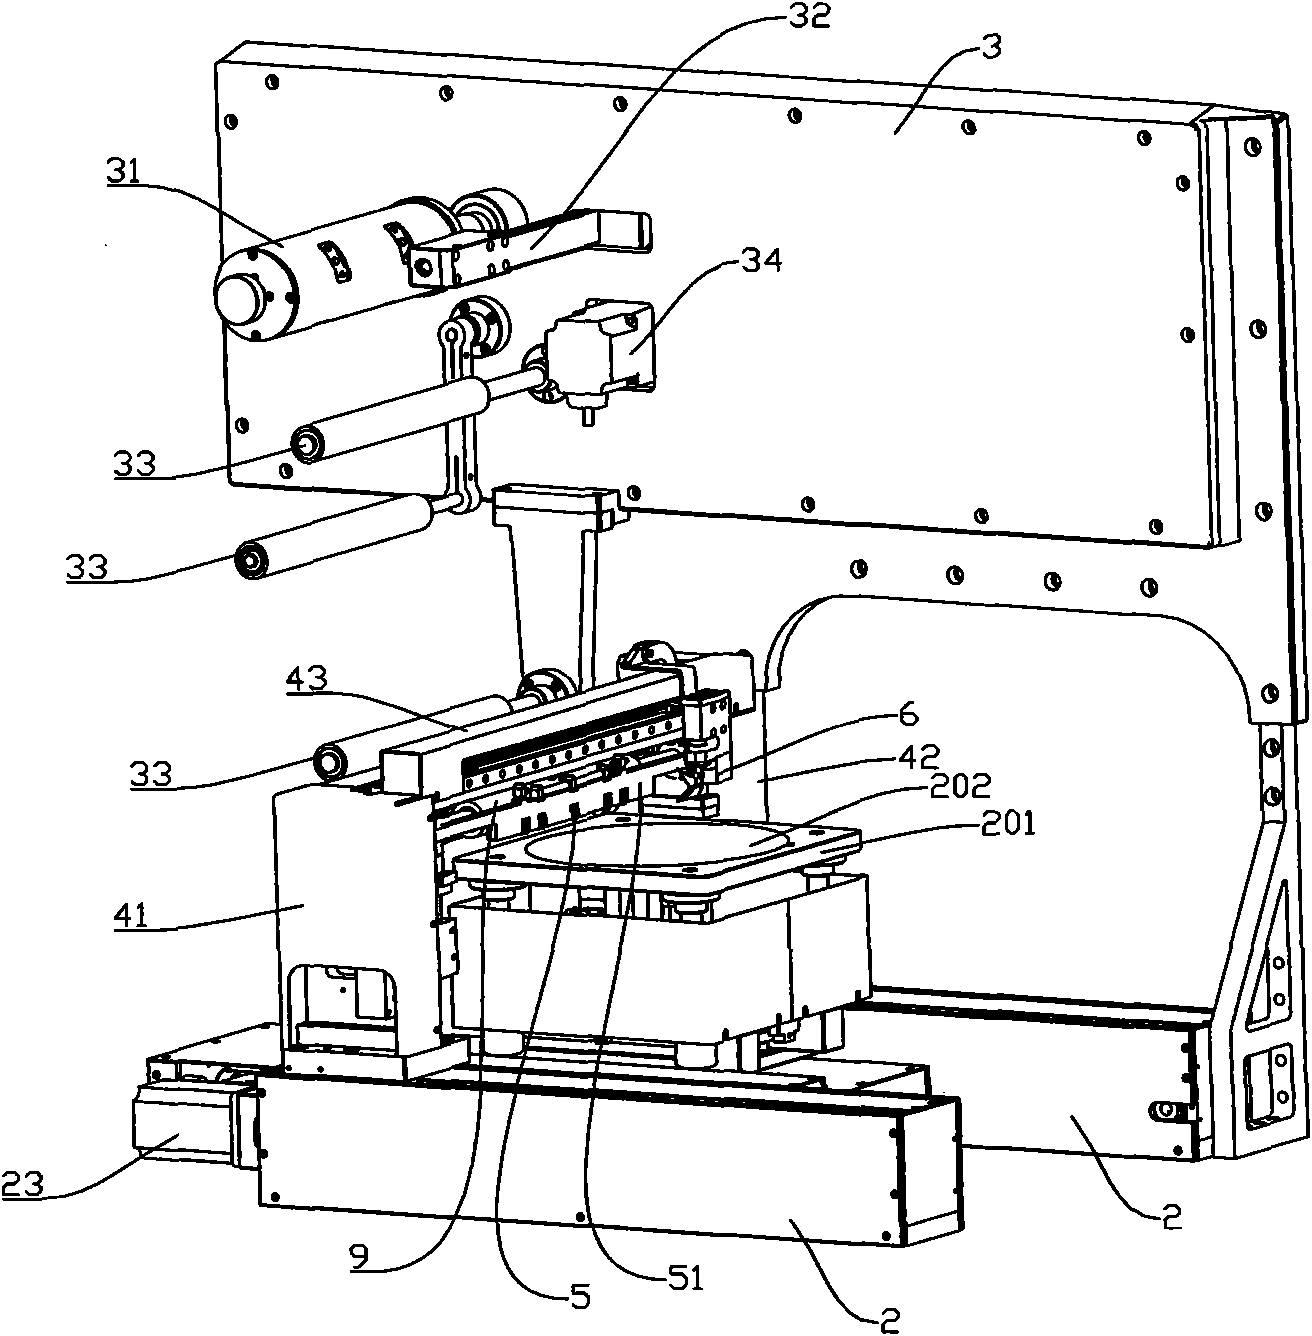 Film adhesion device for film active release